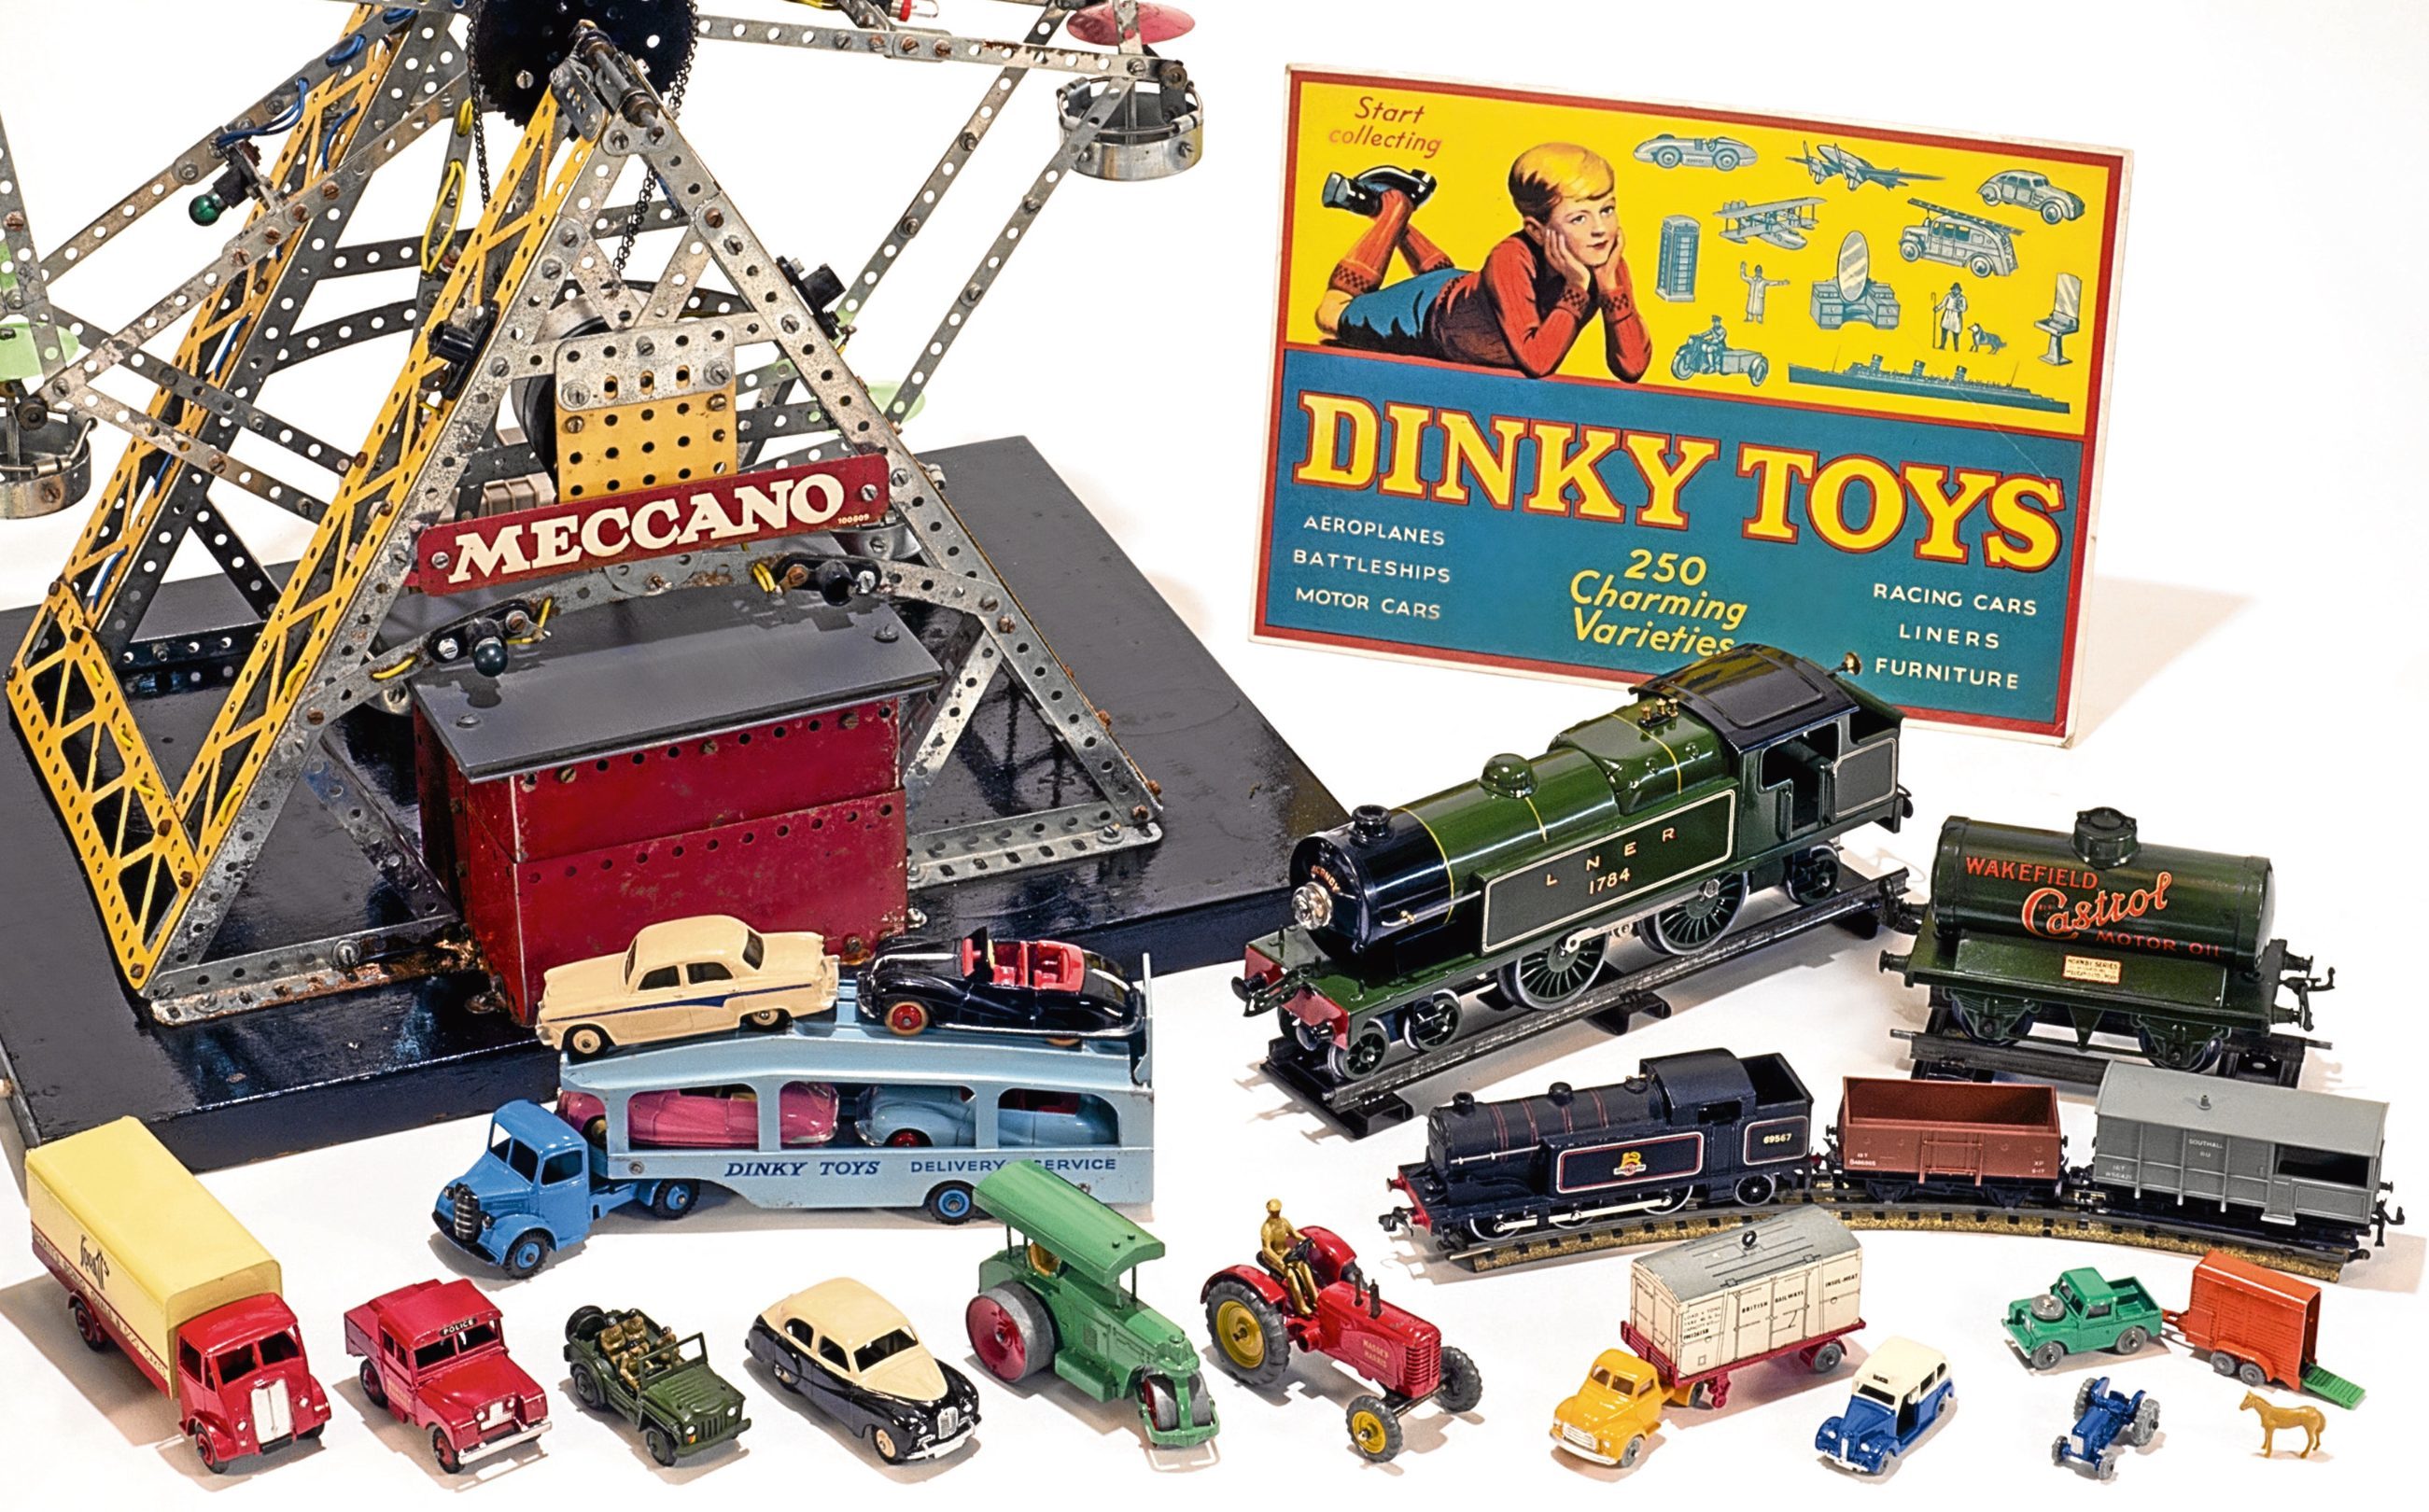 Dinky toys are very popular at auctions worldwide